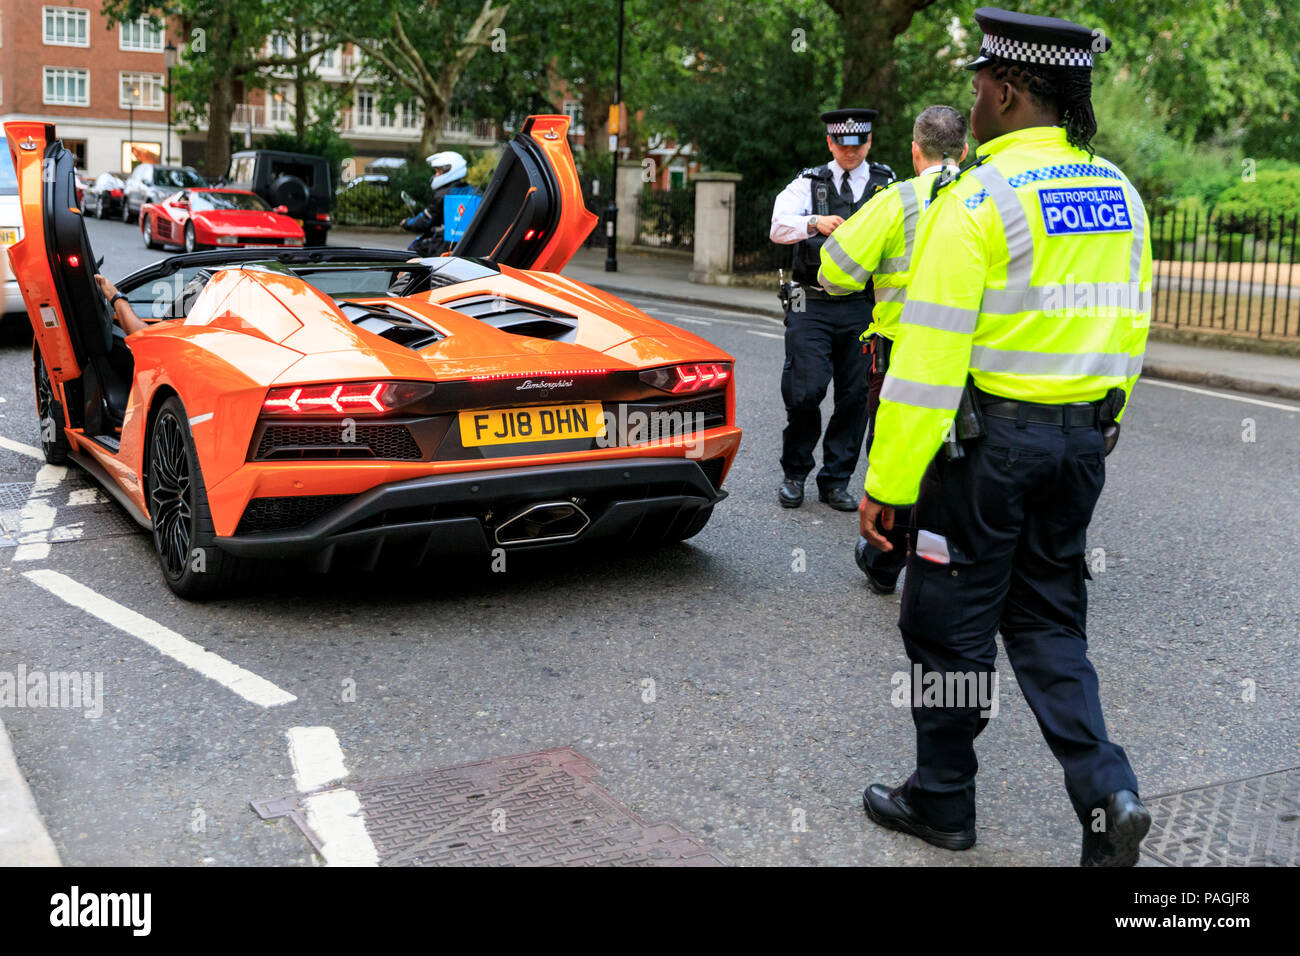 Sloane Street, London, UK, 20th July 2018. Supercars, high-performance and  classic cars, as well as some characterful adaptions, line up and drive  along Sloane Street for Supercar Sunday, which sees around 400